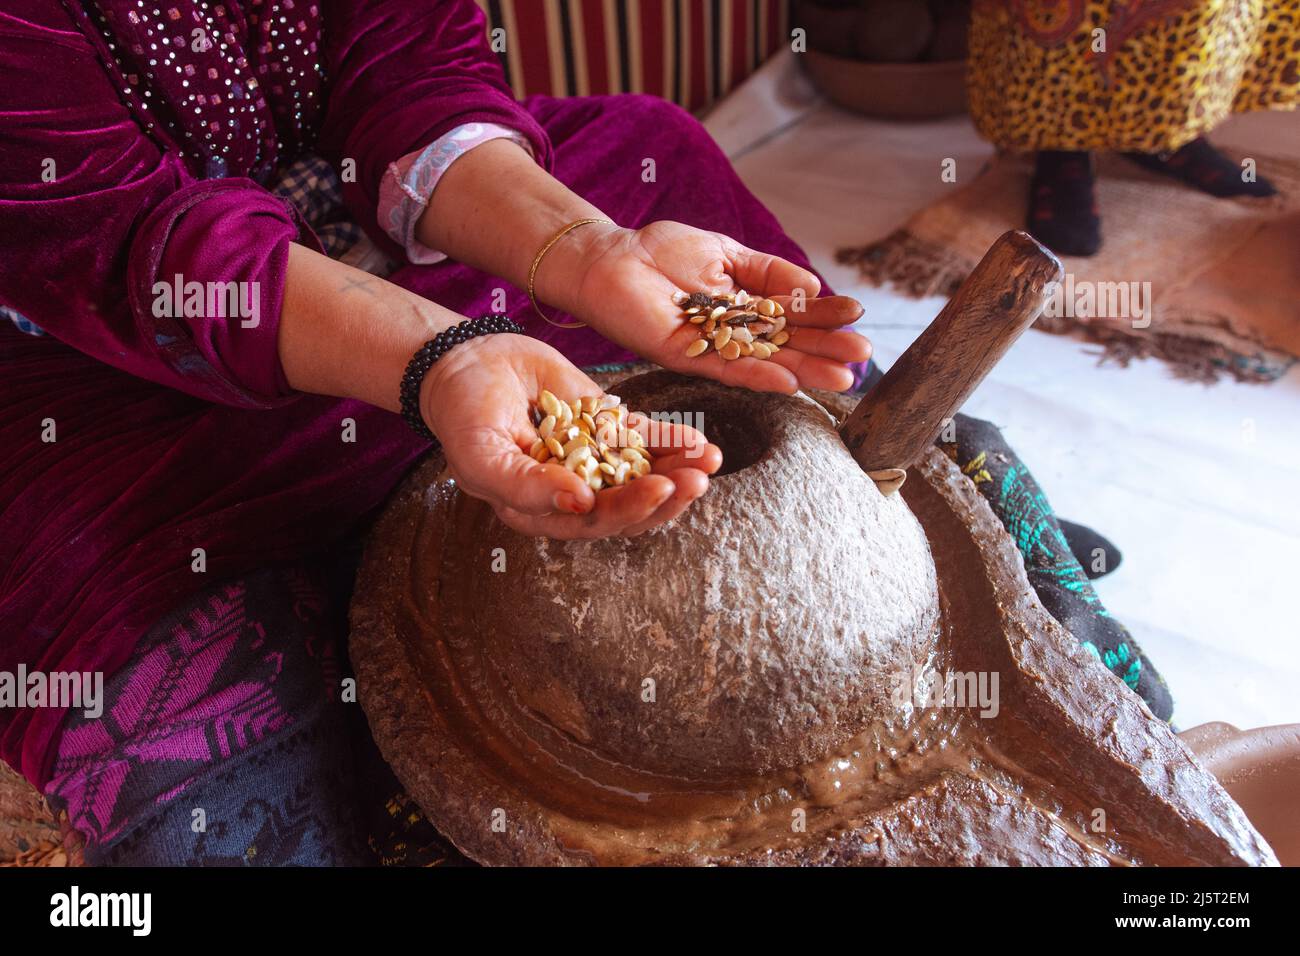 Women making argan oil, Morocco. Holding seeds with her hands. Real people doing real things. Africa Stock Photo